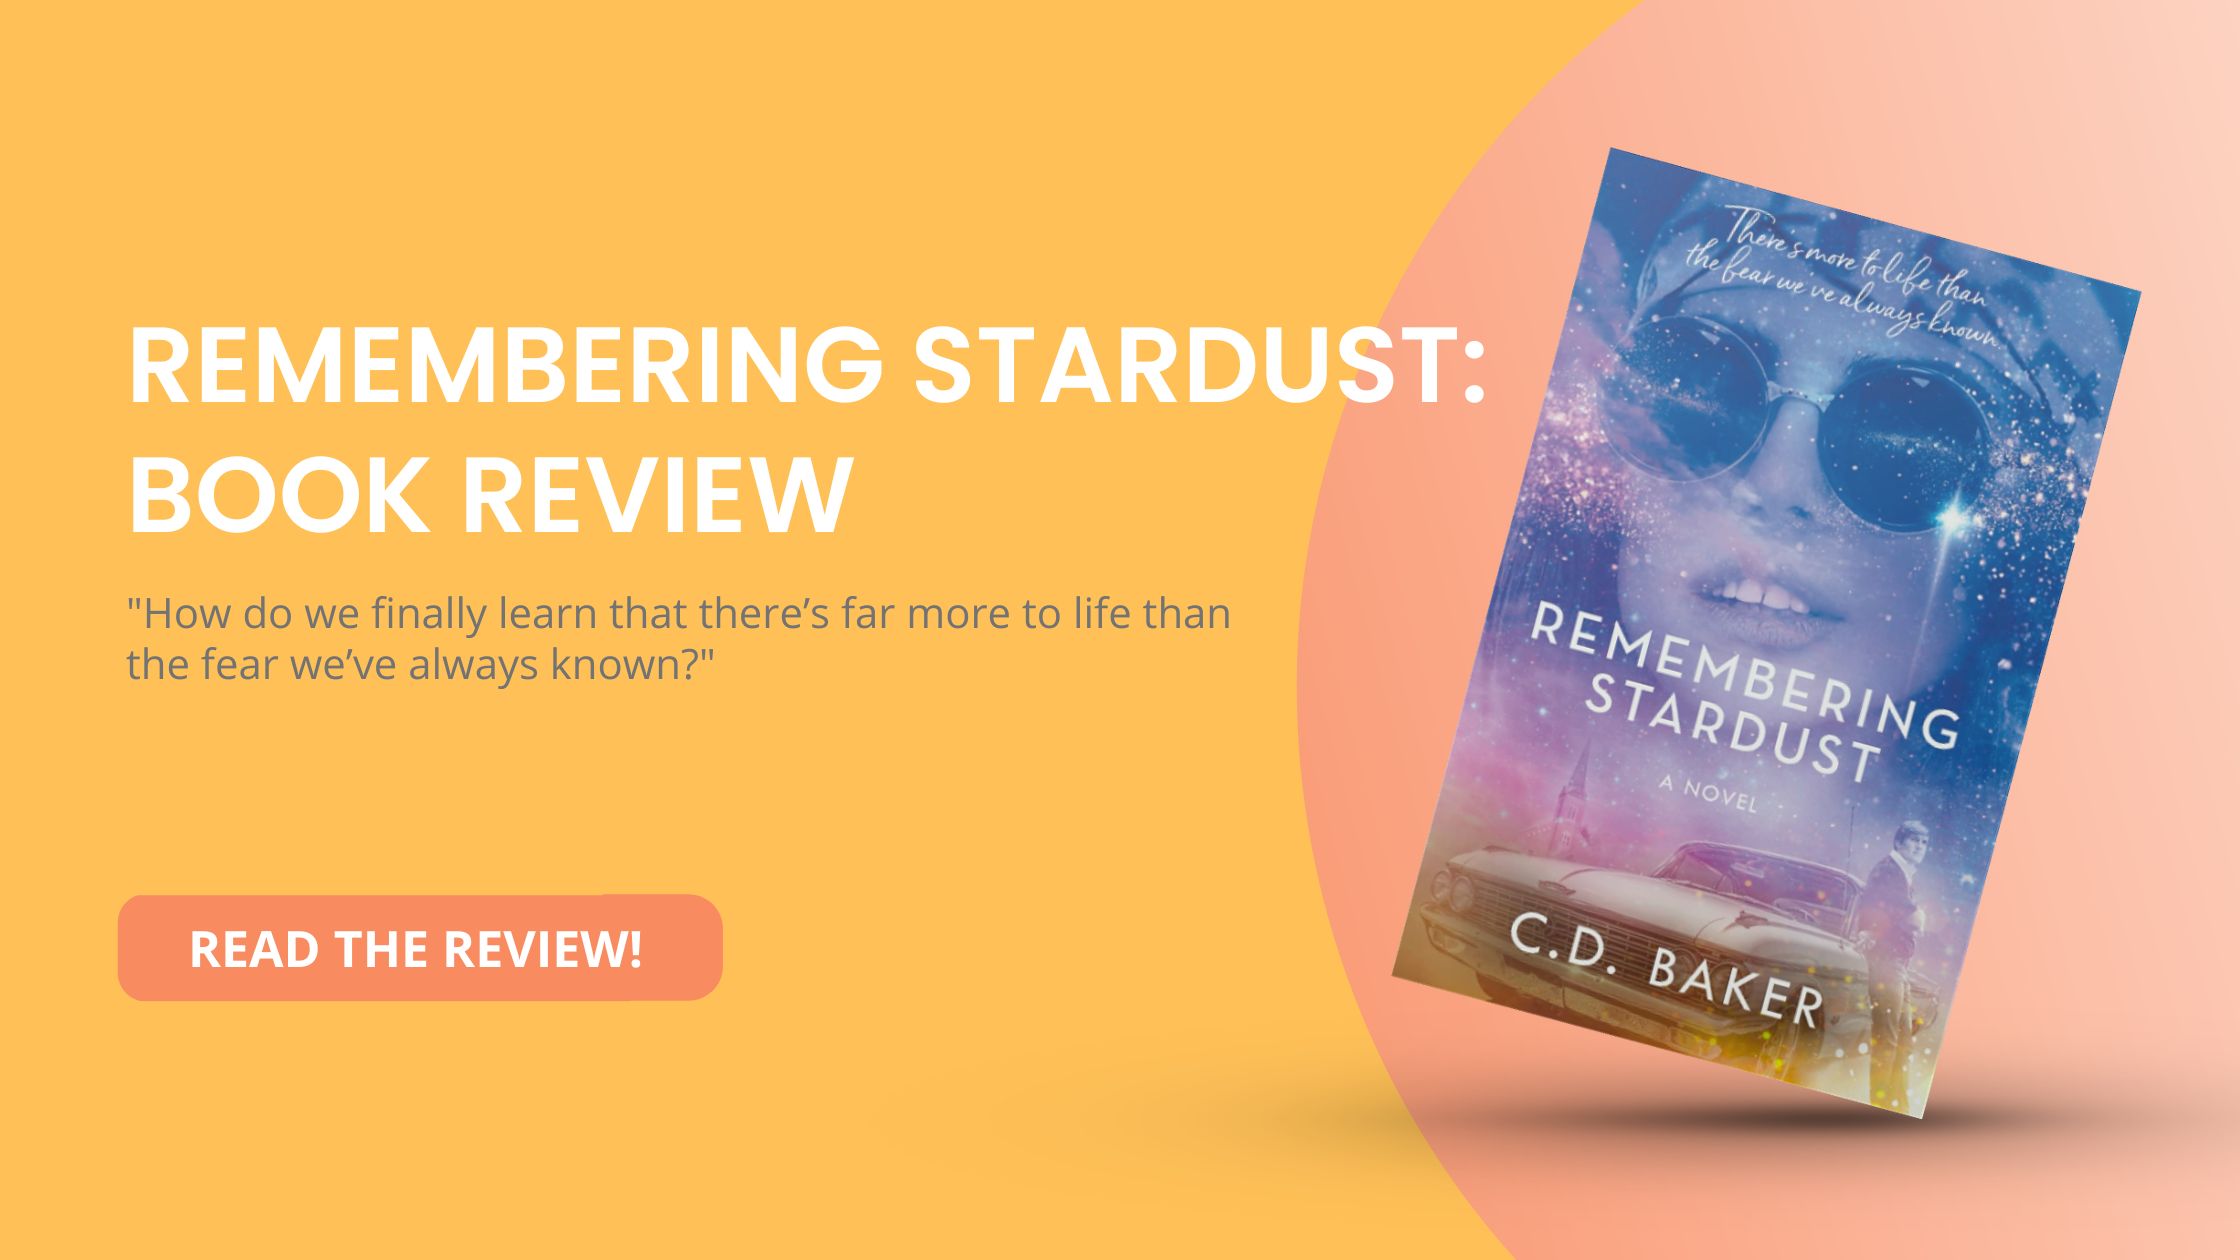 Remembering Stardust by C.D. Baker: Book Review